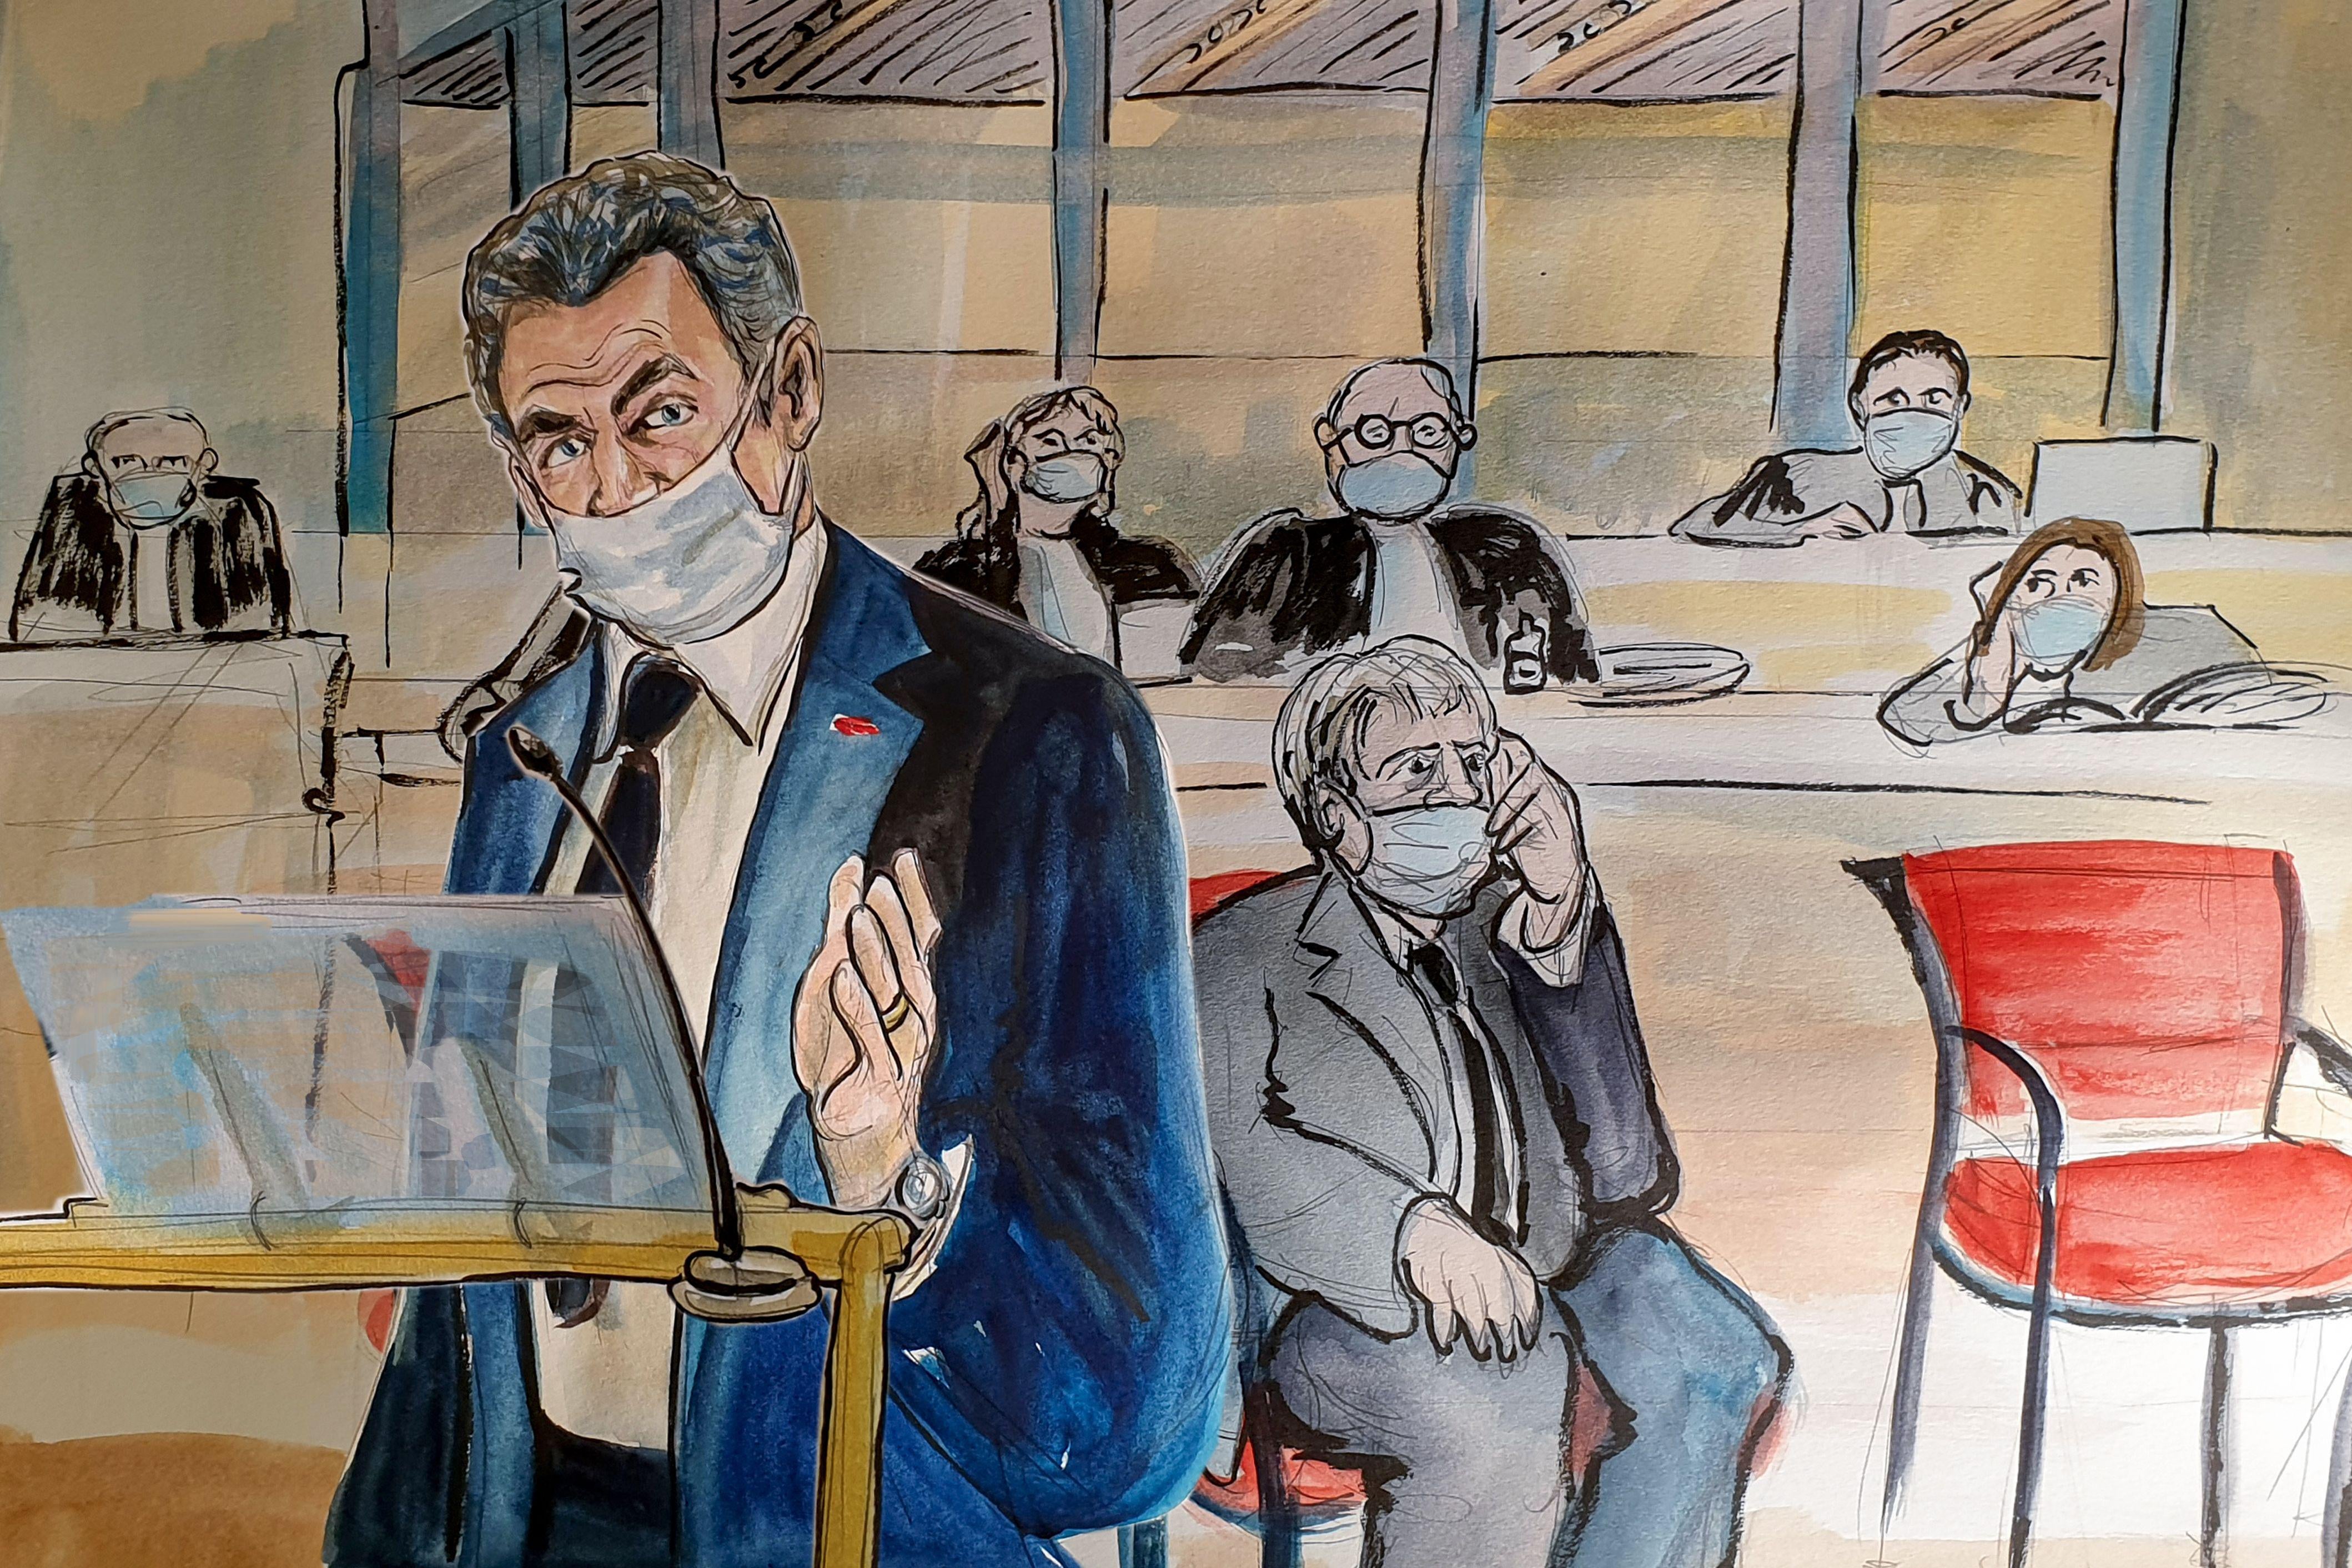 A cartoonish courtroom sketch of a masked Sarkzoy testifying.